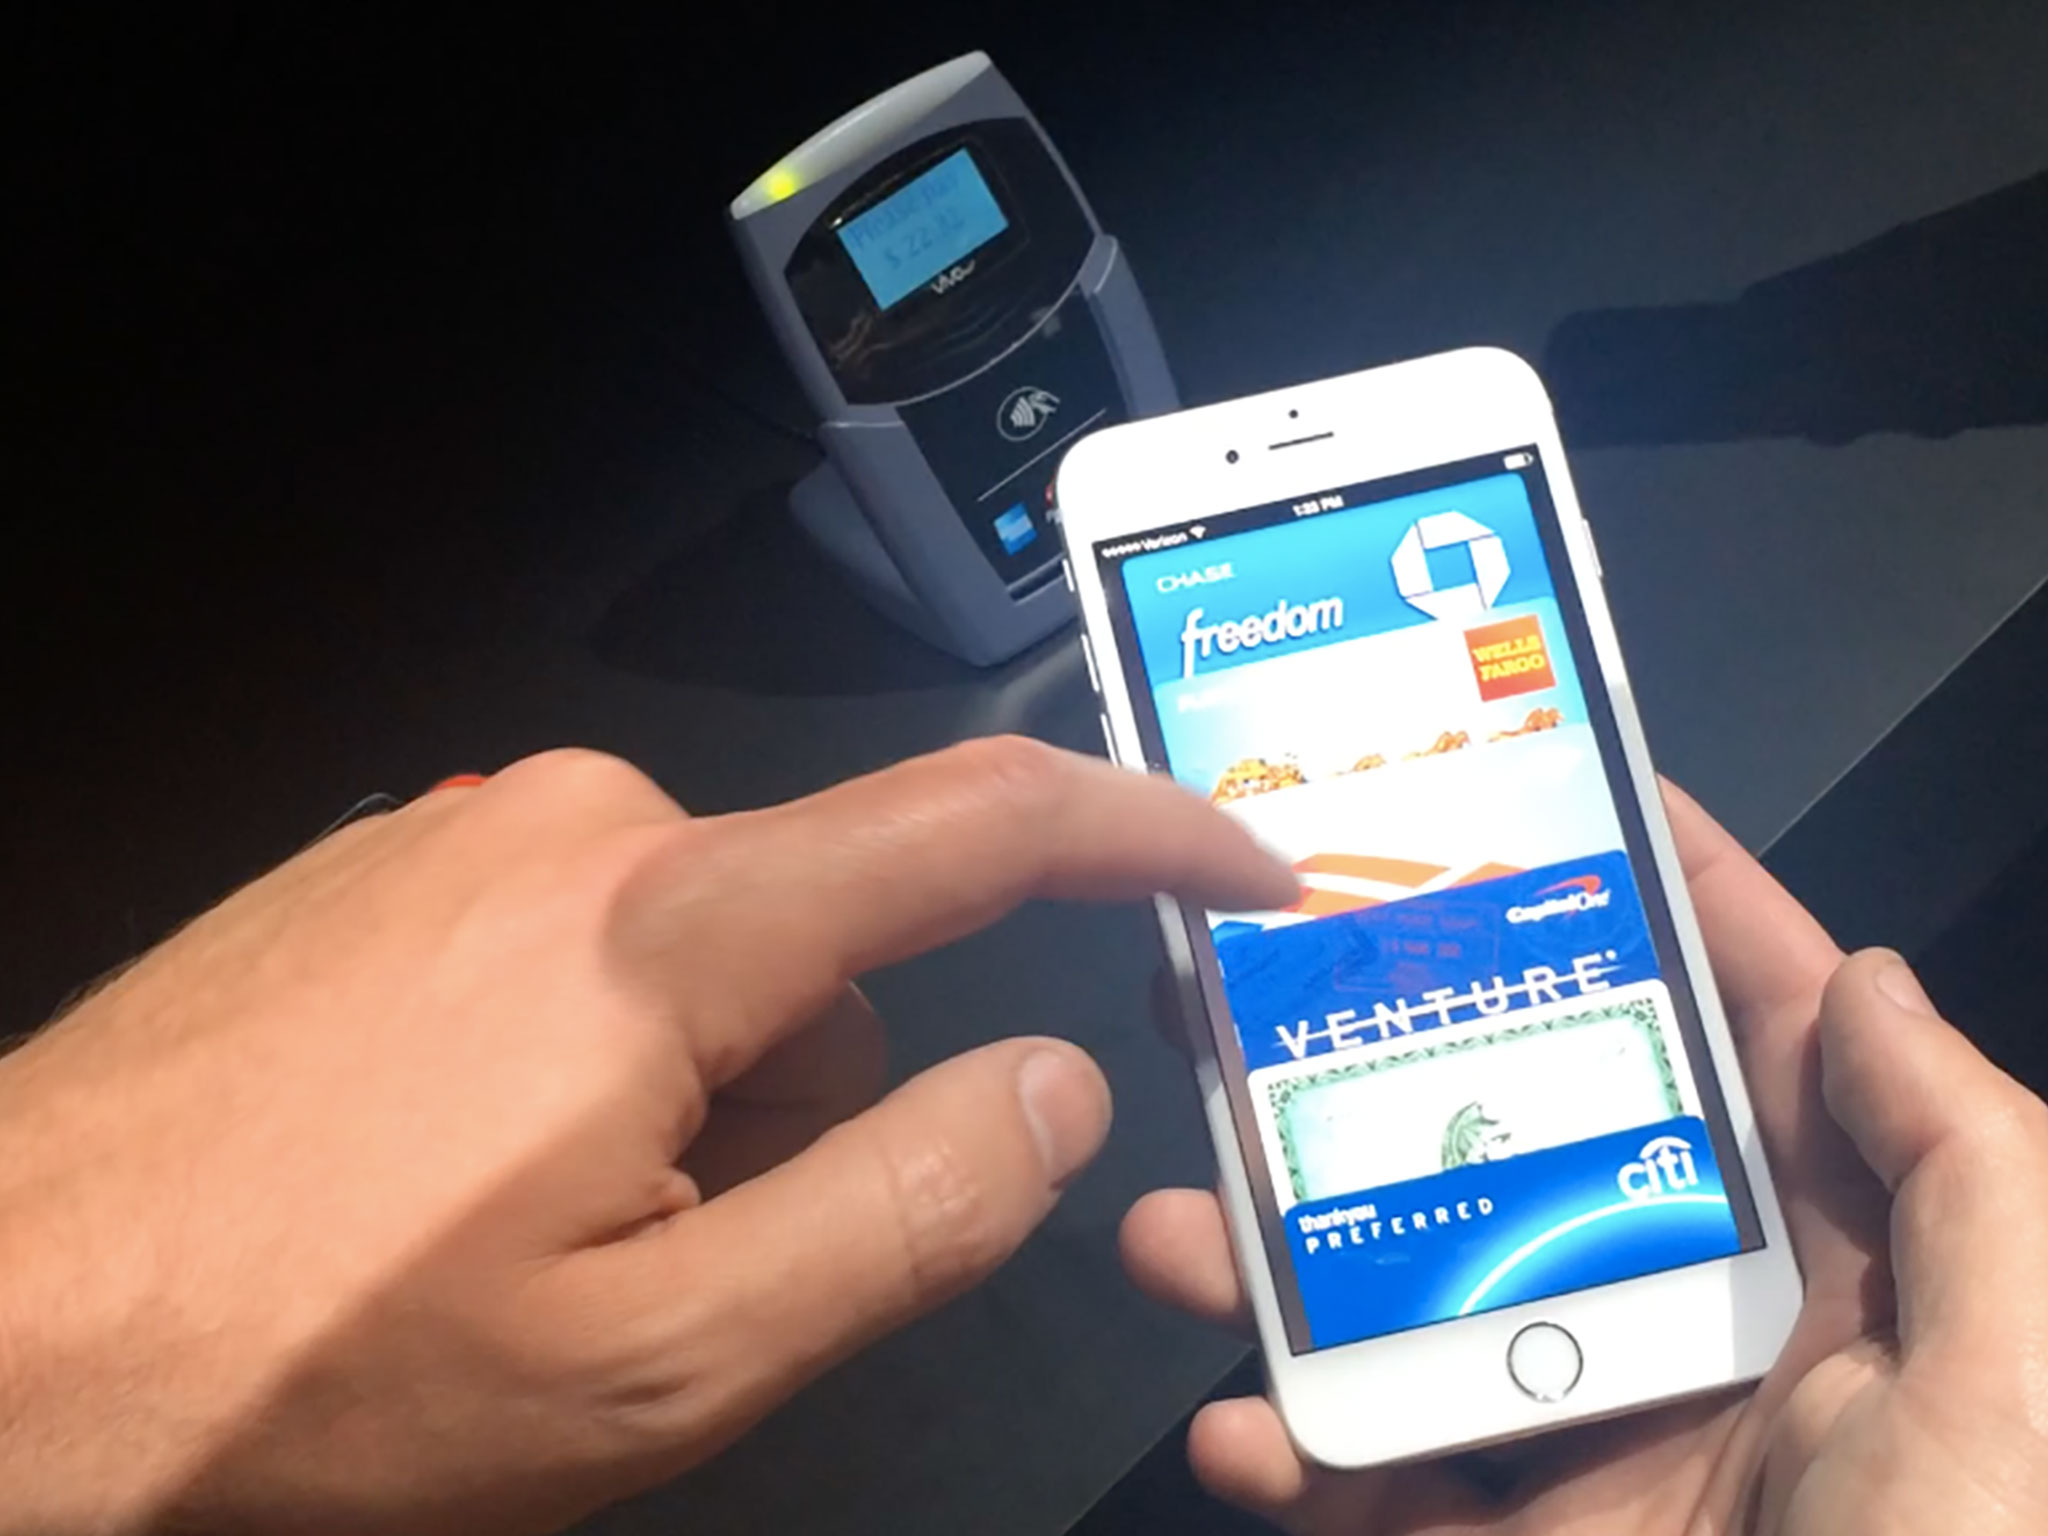 CurrentC can switch to NFC tech in the future